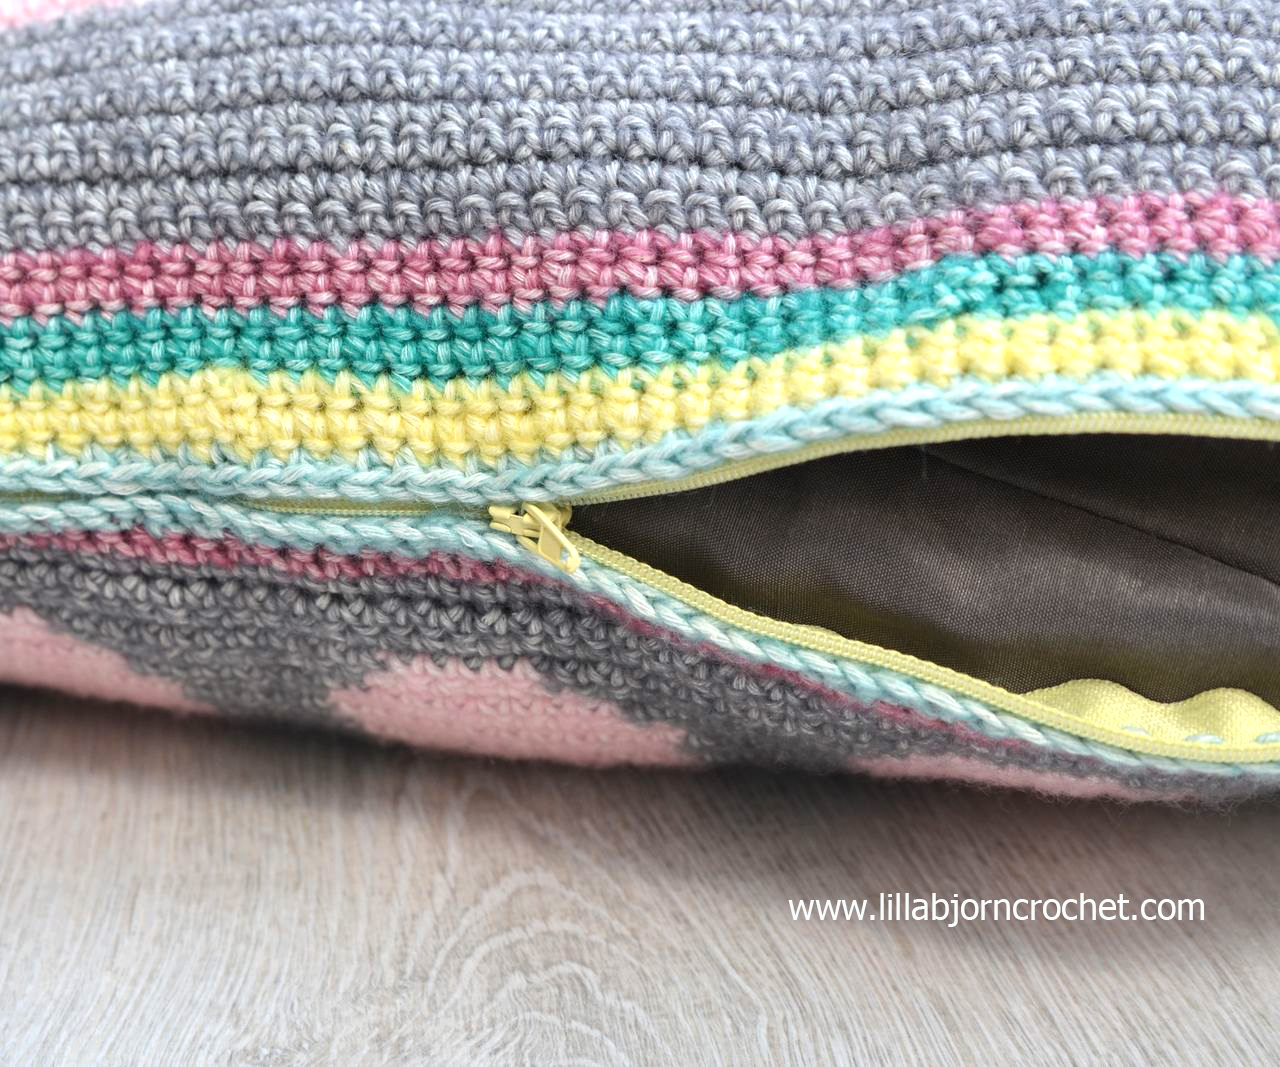 Crochet tapestry pillow cover with colorful circles. Free pattern by Lilla Bjorn Crochet